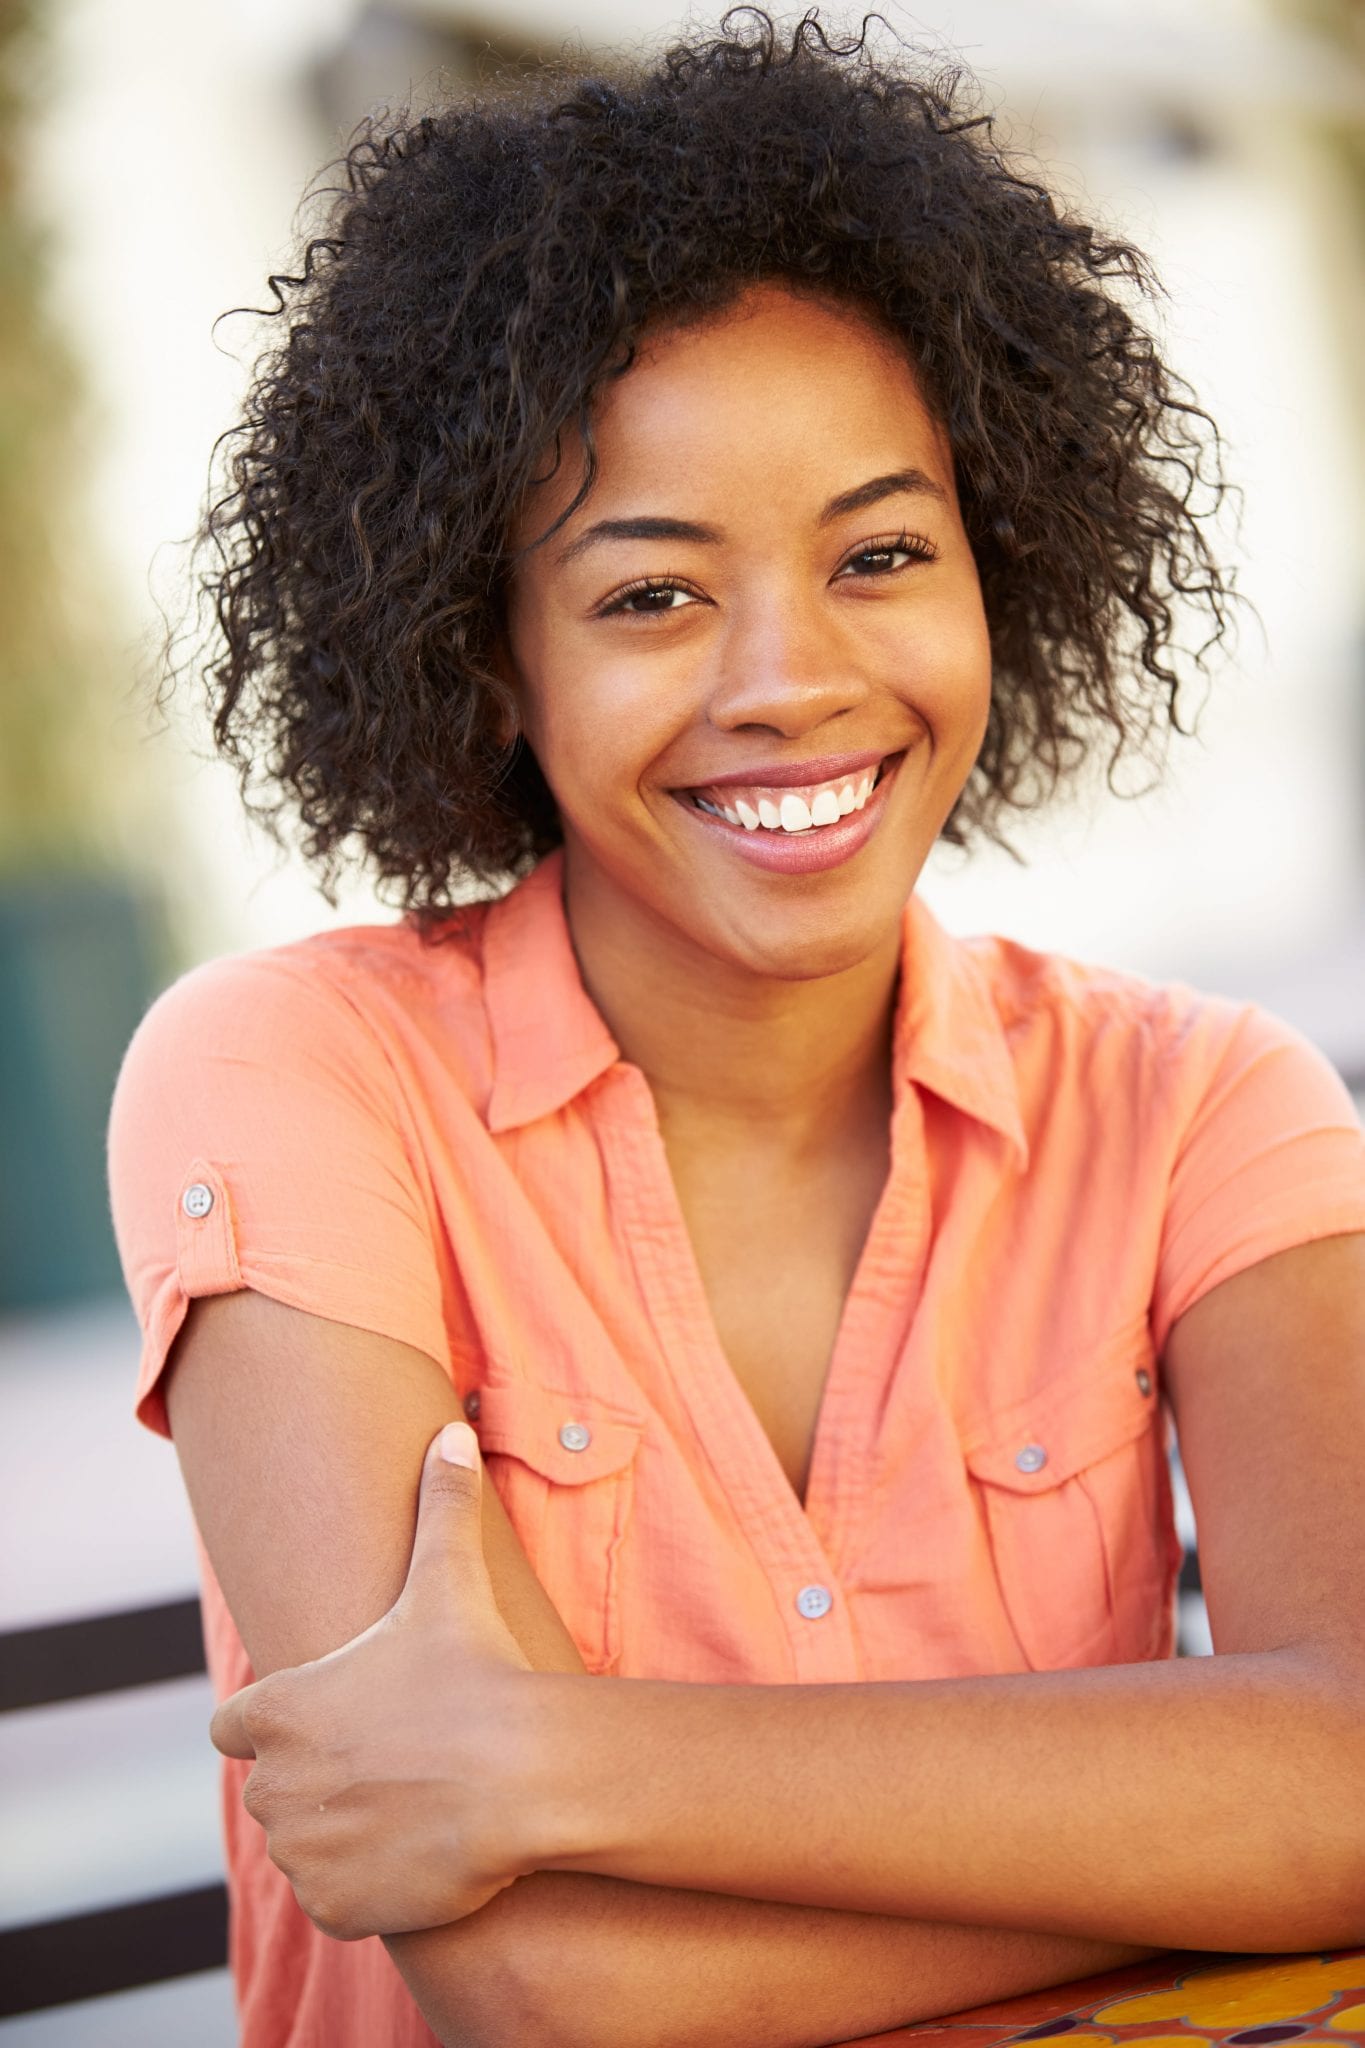 Portrait Of Smiling African American Woman